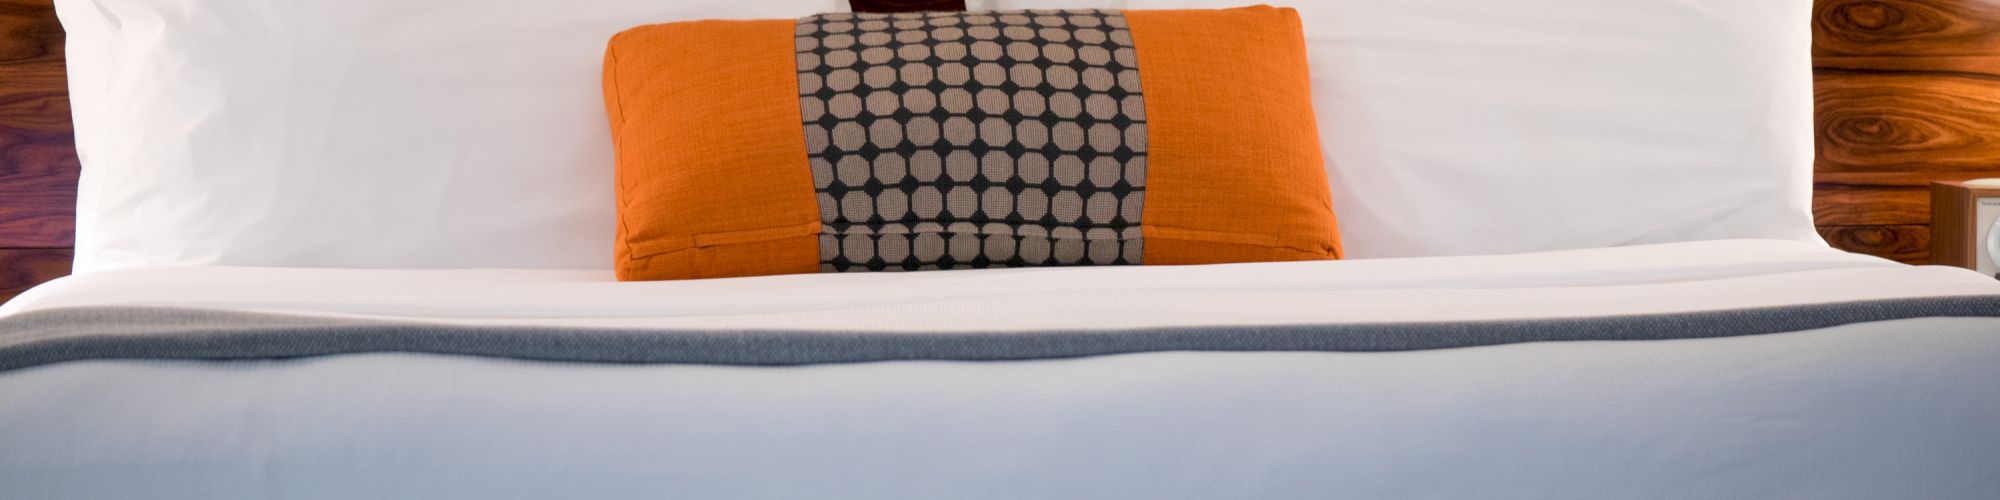 The image shows a neatly made bed with white pillows and an orange accent pillow with a pattern, set against a wooden headboard.